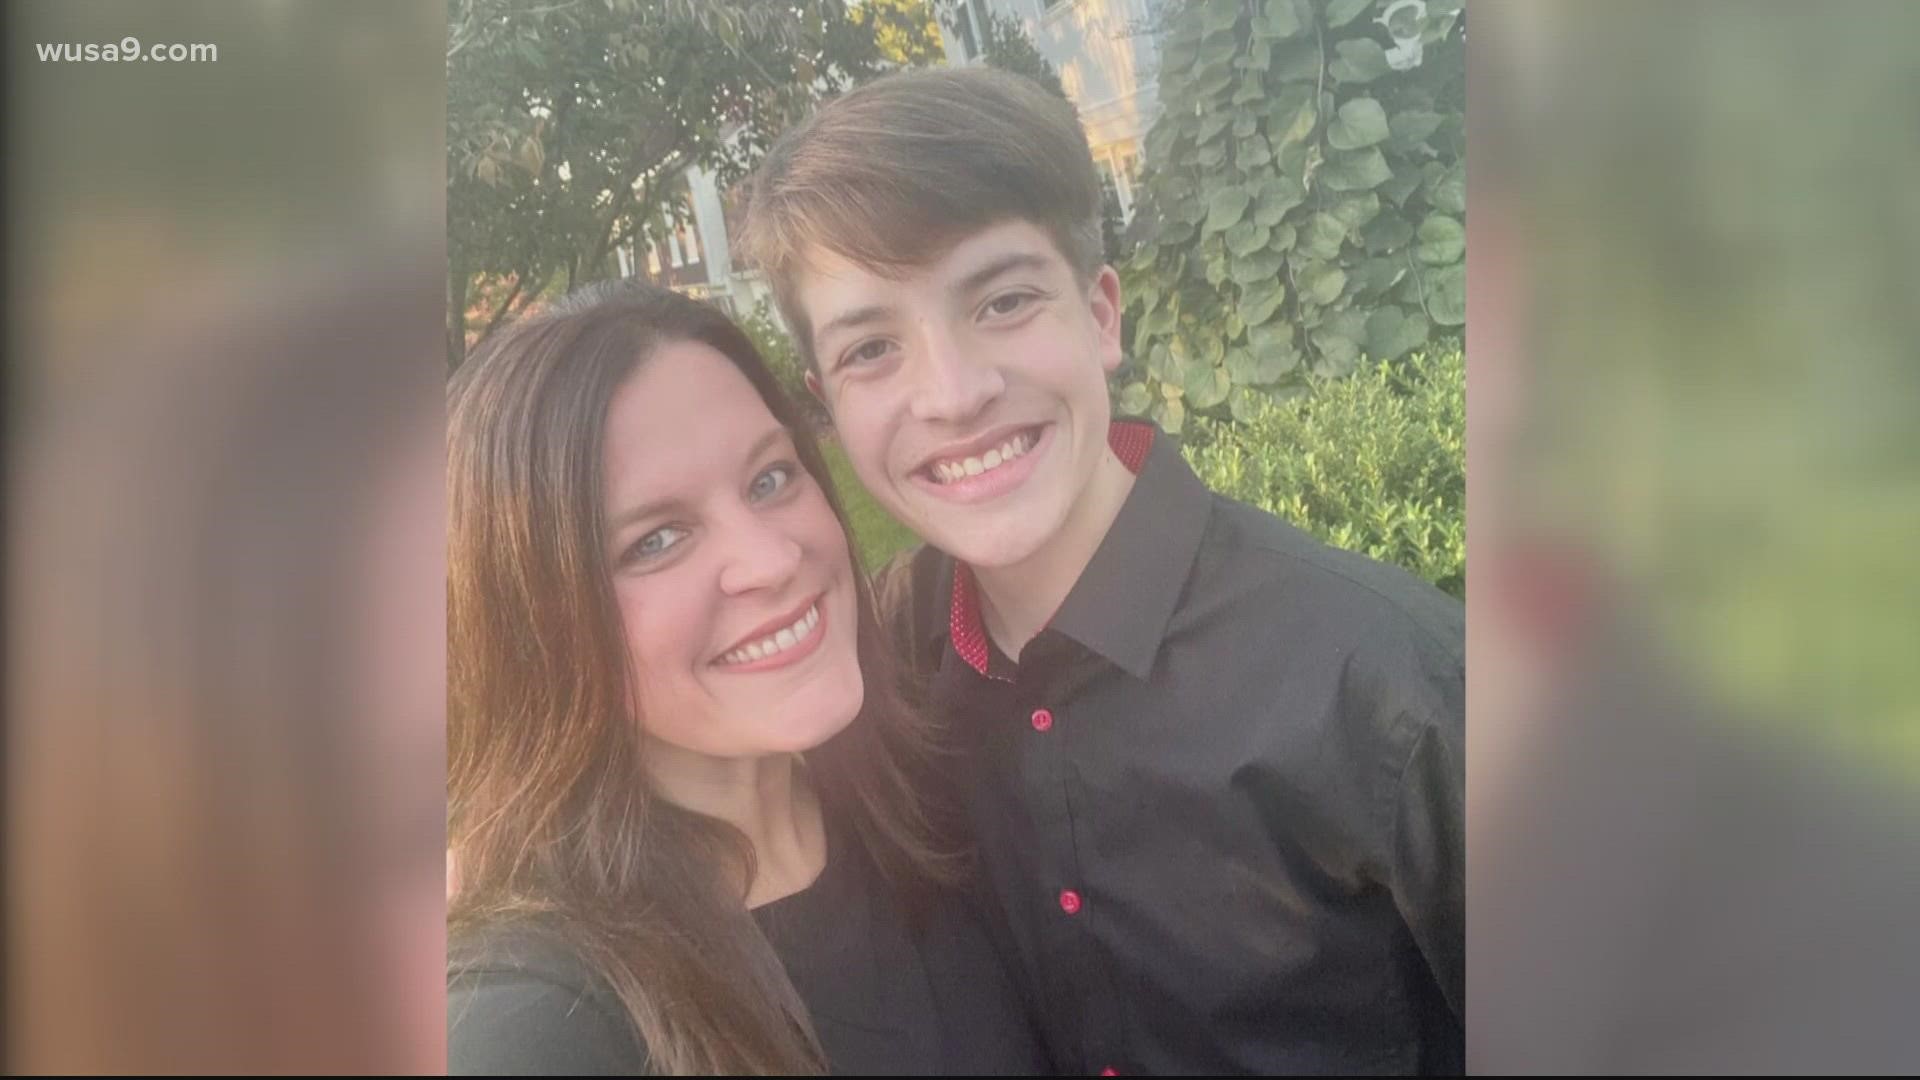 Viral Facebook post helps mom find formula for tube-fed son | wusa9.com